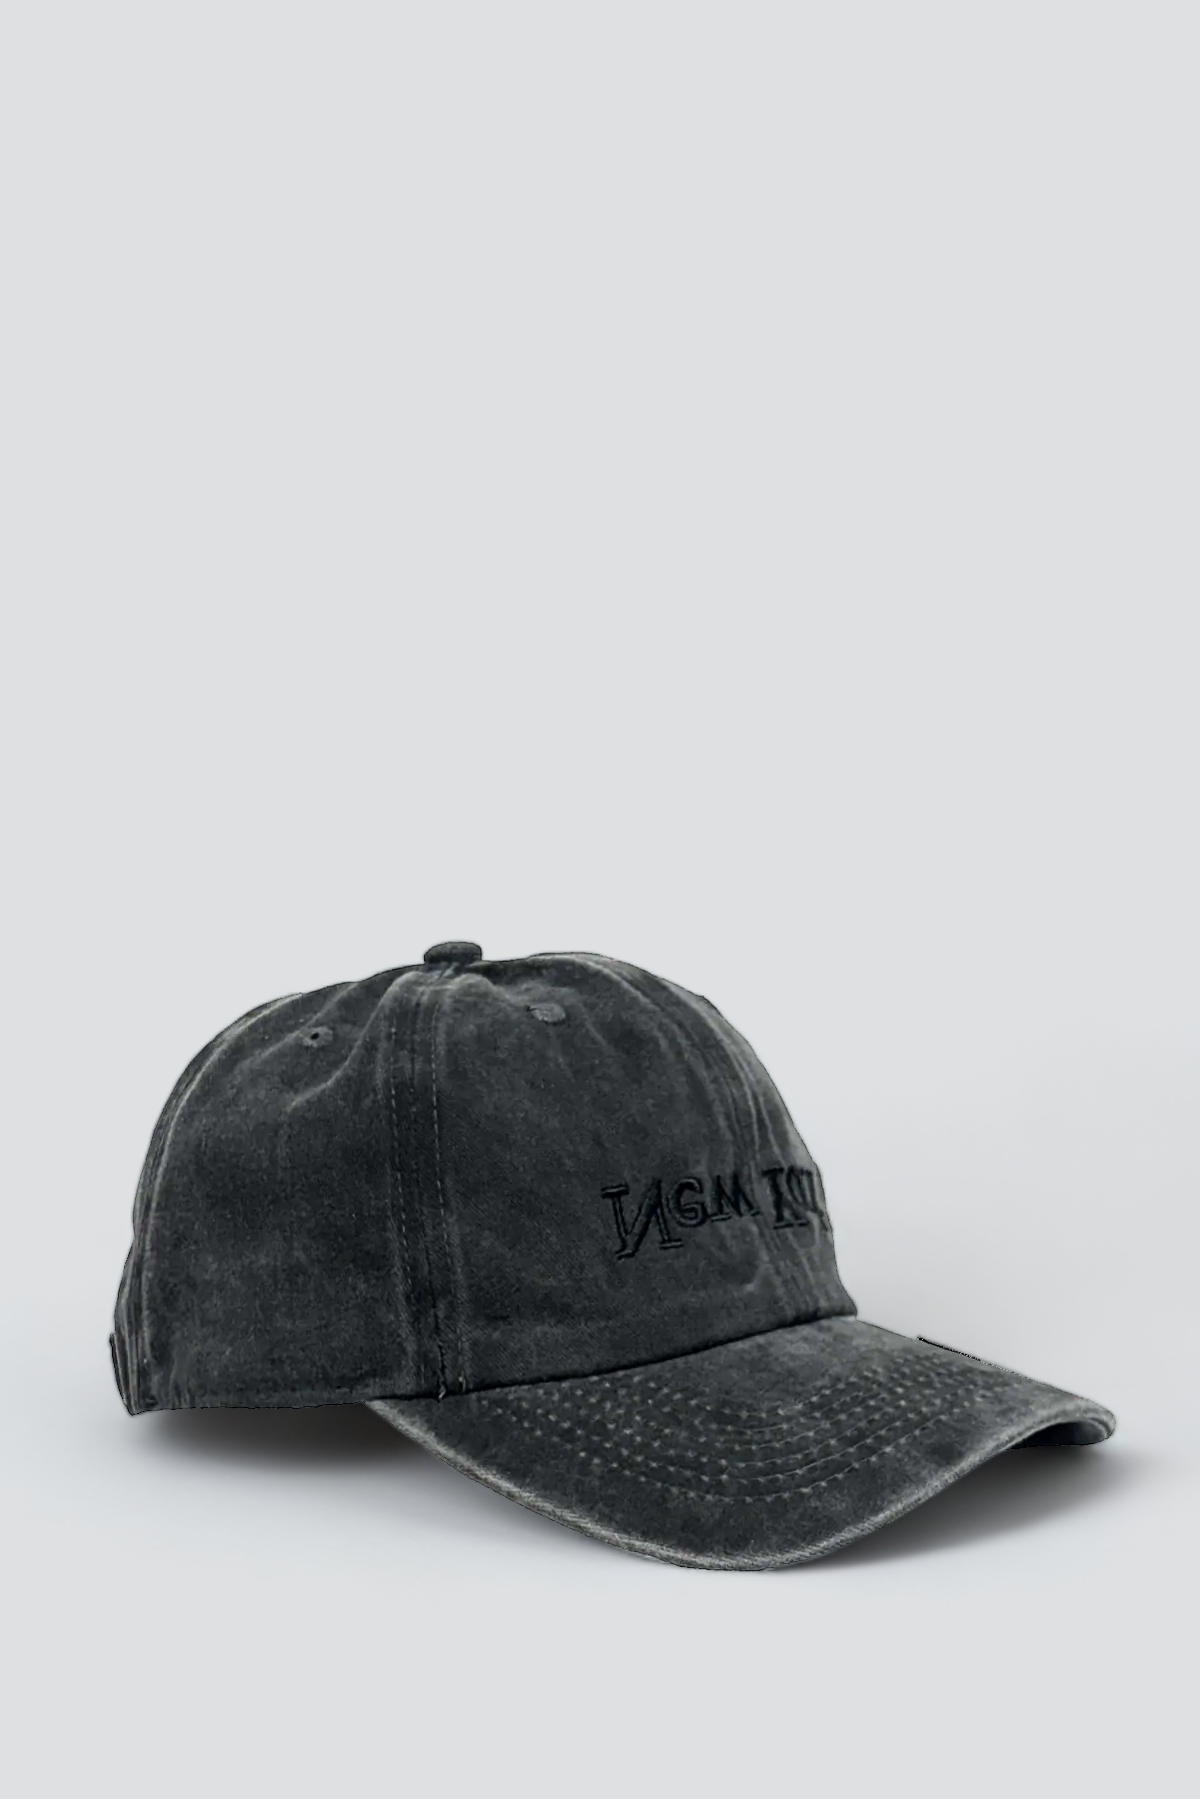 New York Embroidered Hat - Washed Black